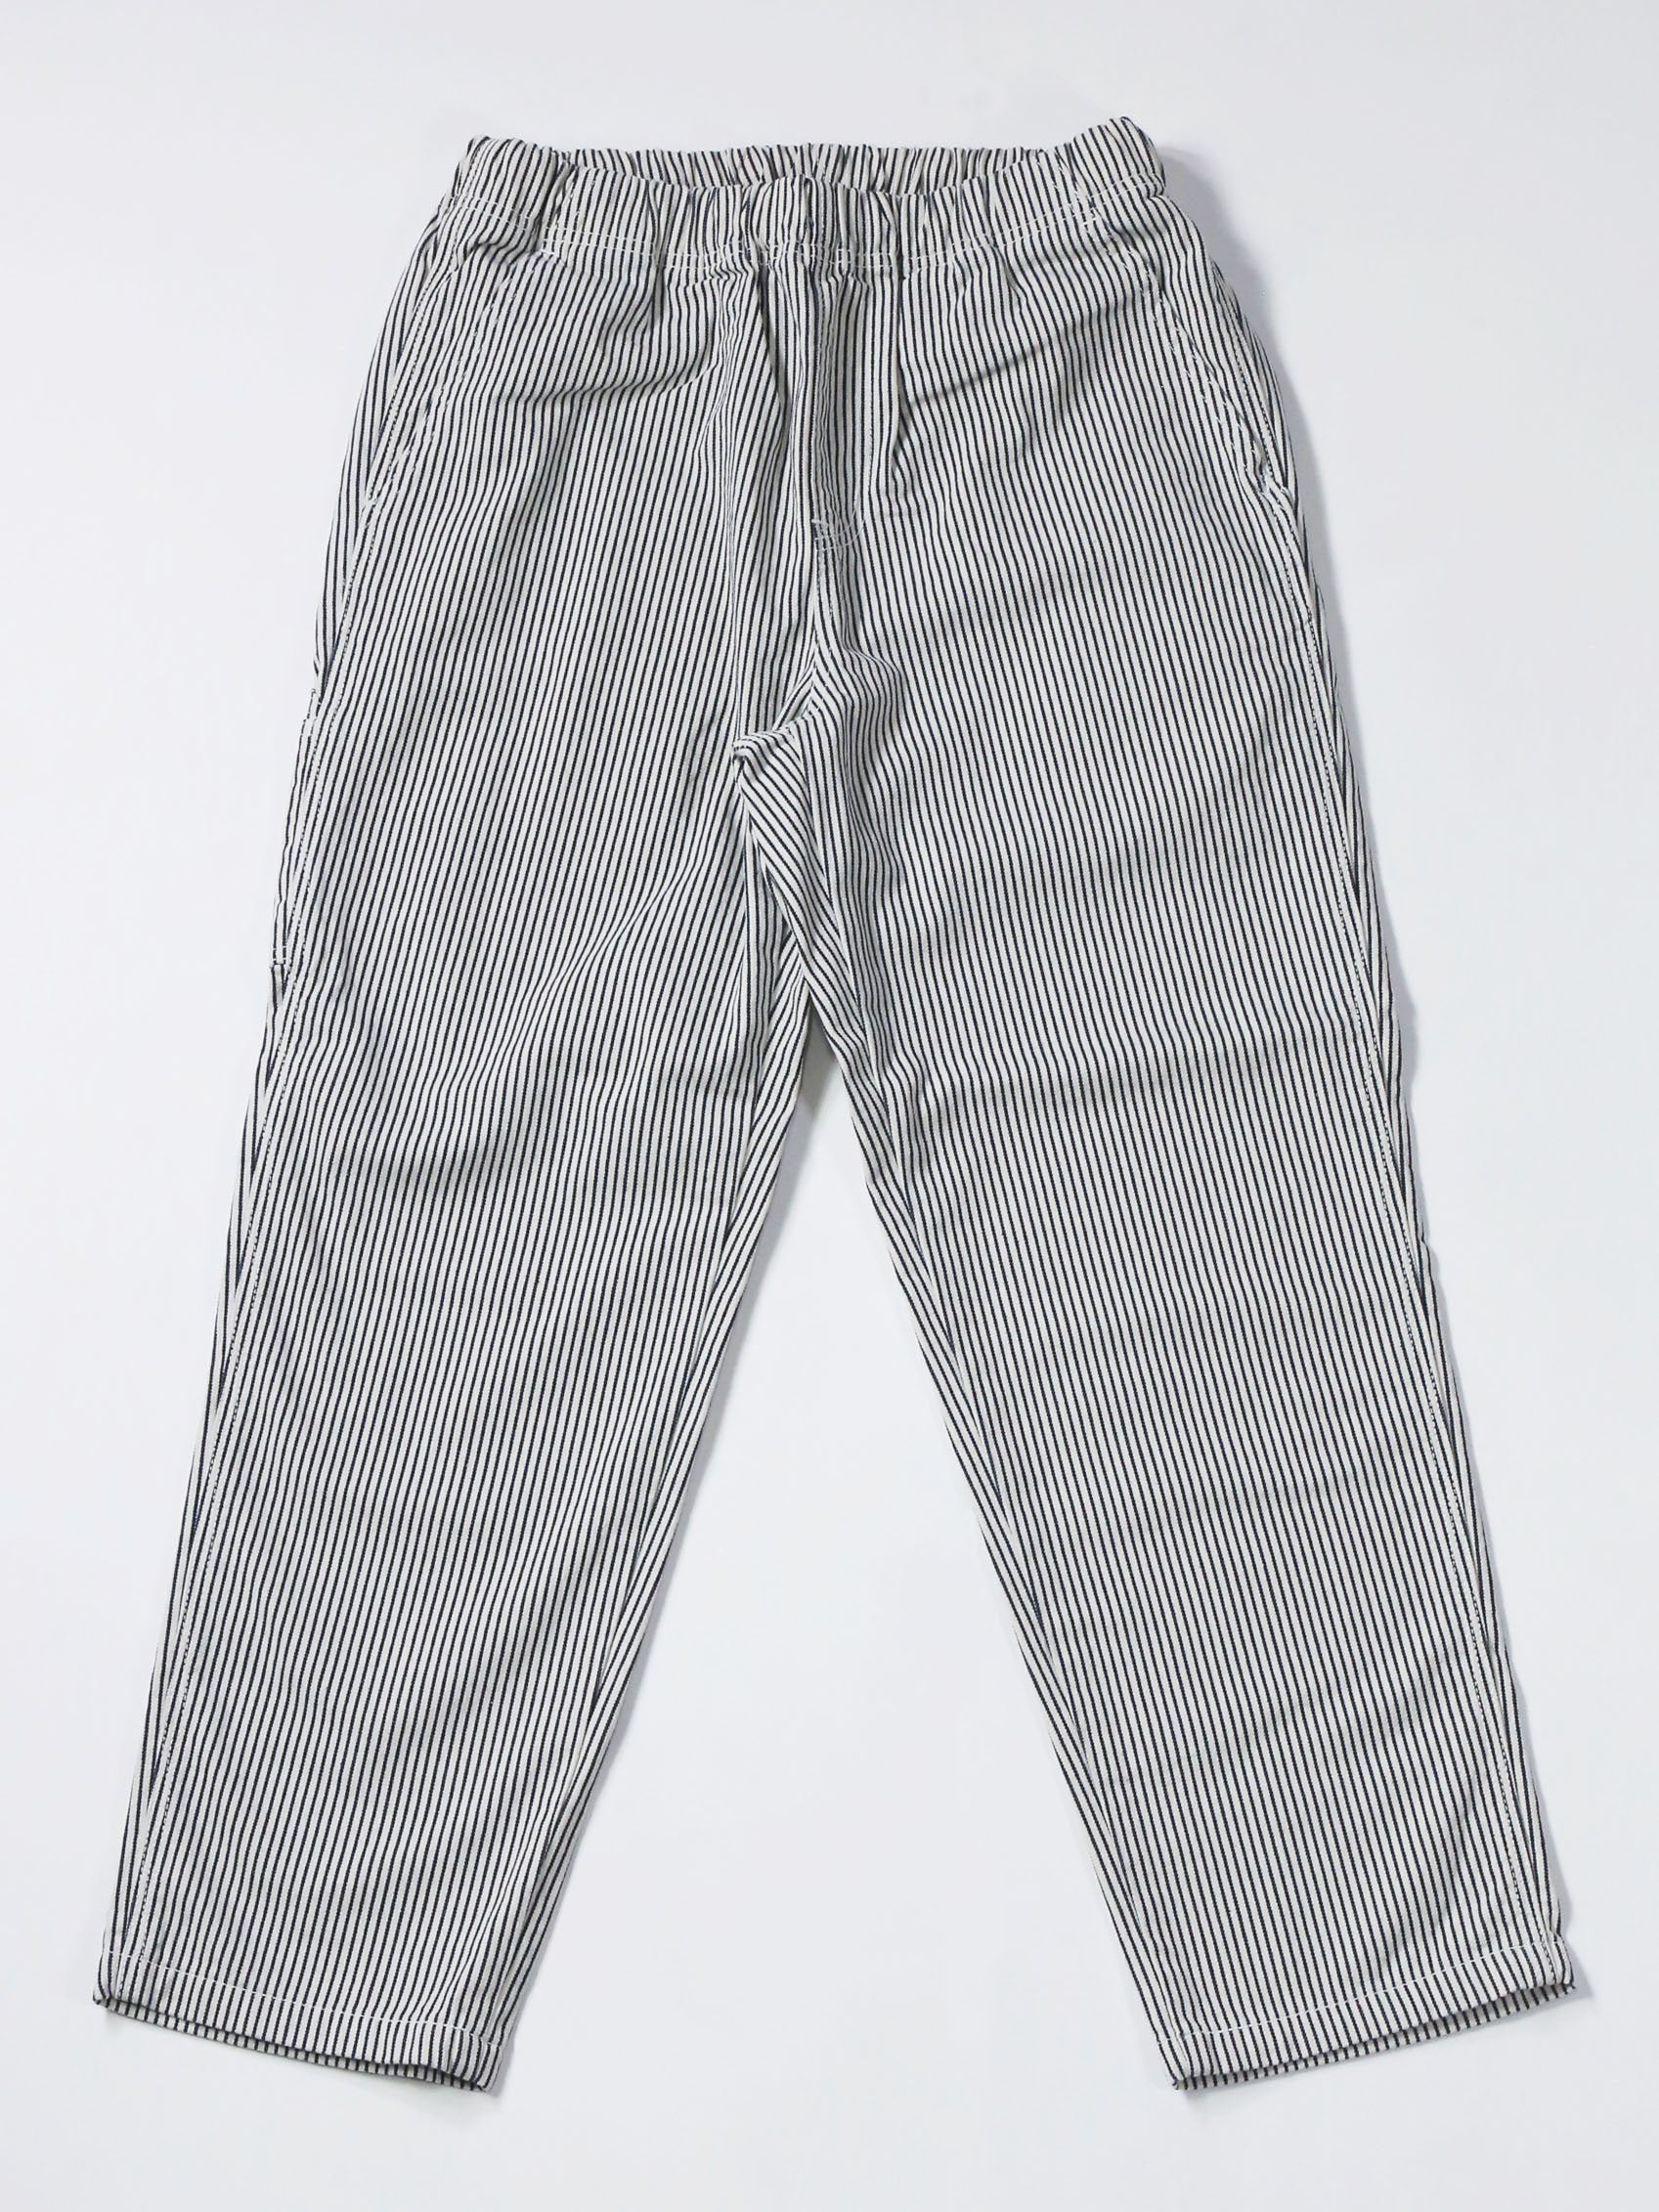 Hickory Painter Pants [Inner Strap] Bobson Workers